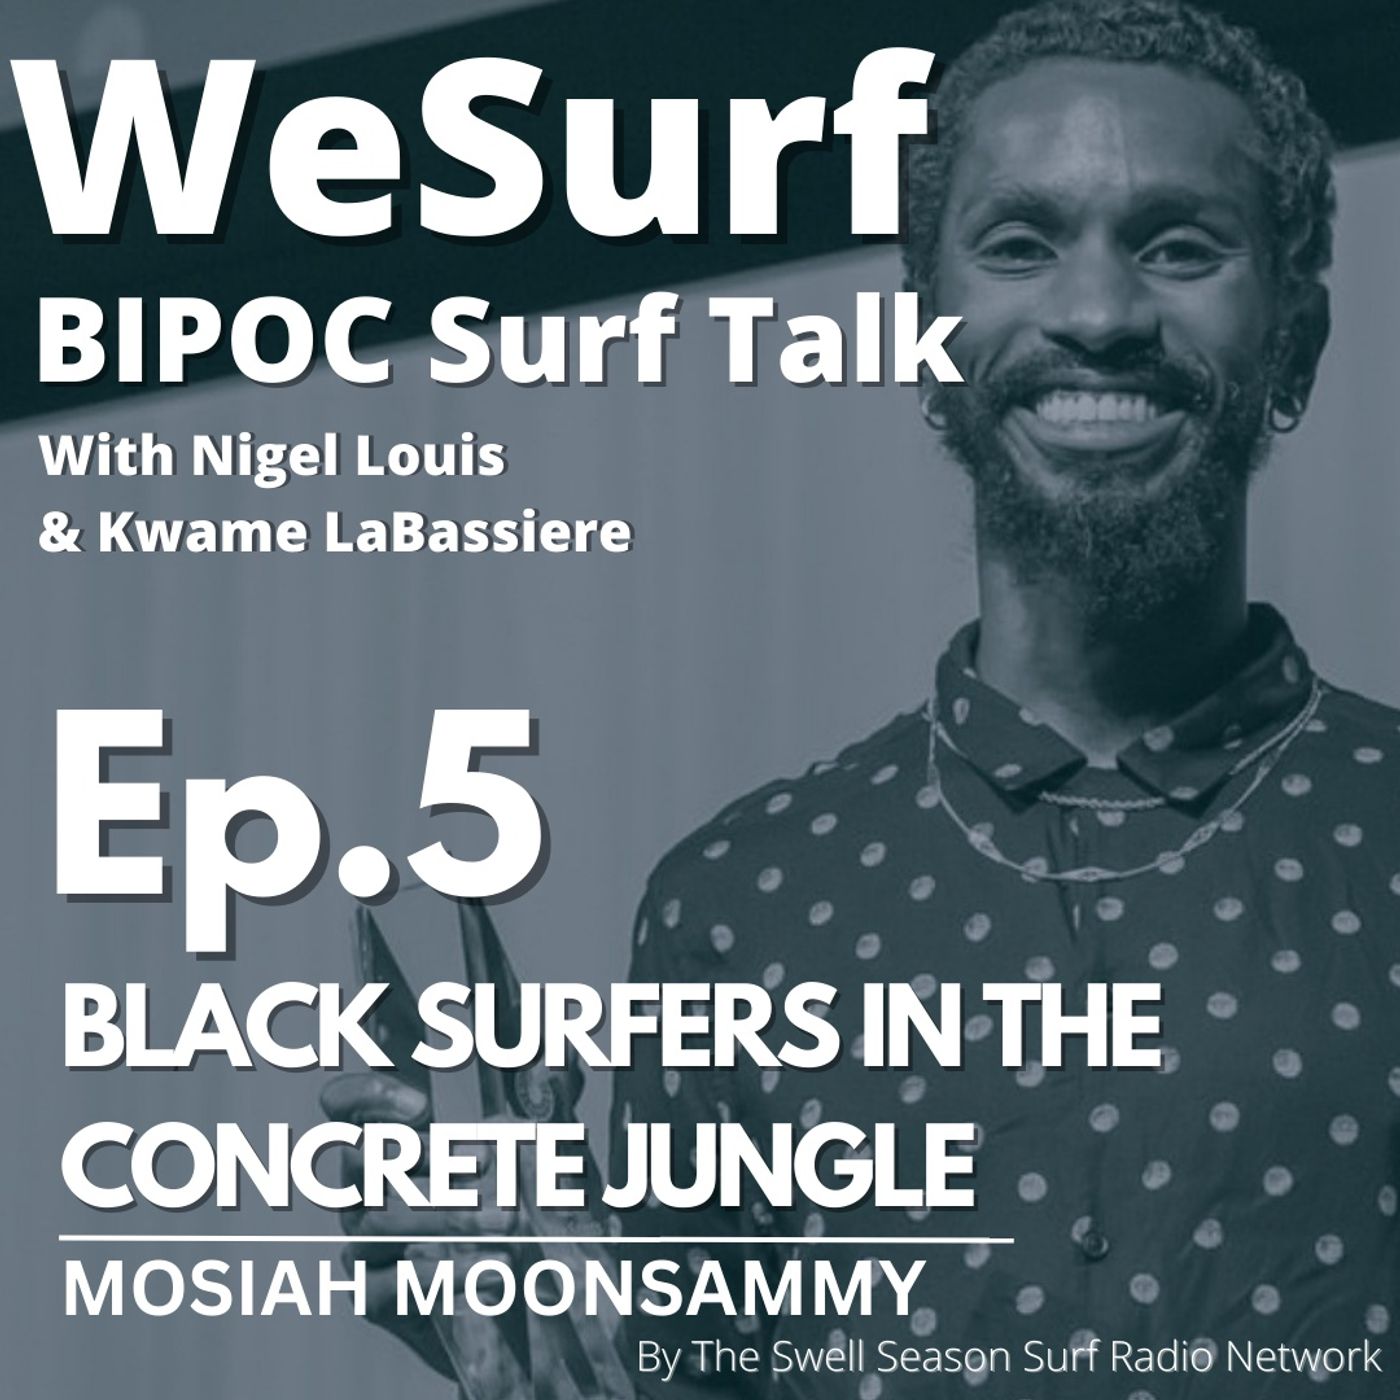 WeSurf Black Surfers in the Concrete Jungle with Mosiah Moonsammy